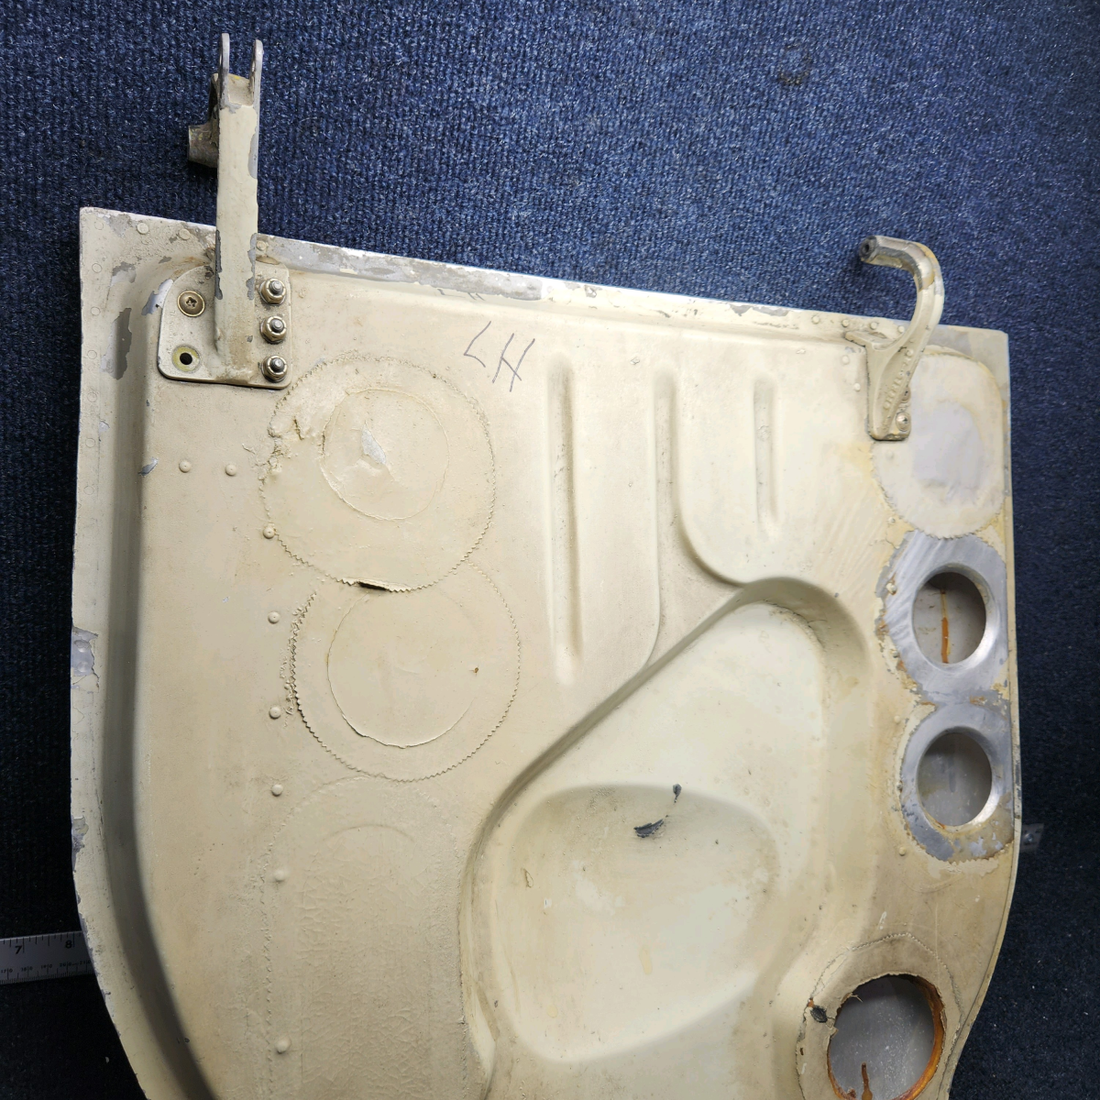 Used aircraft parts for sale, 35-815055-6 BEECHCRAFT F35 DOOR ASSEMBLY INBD LH. AS REMOVED.